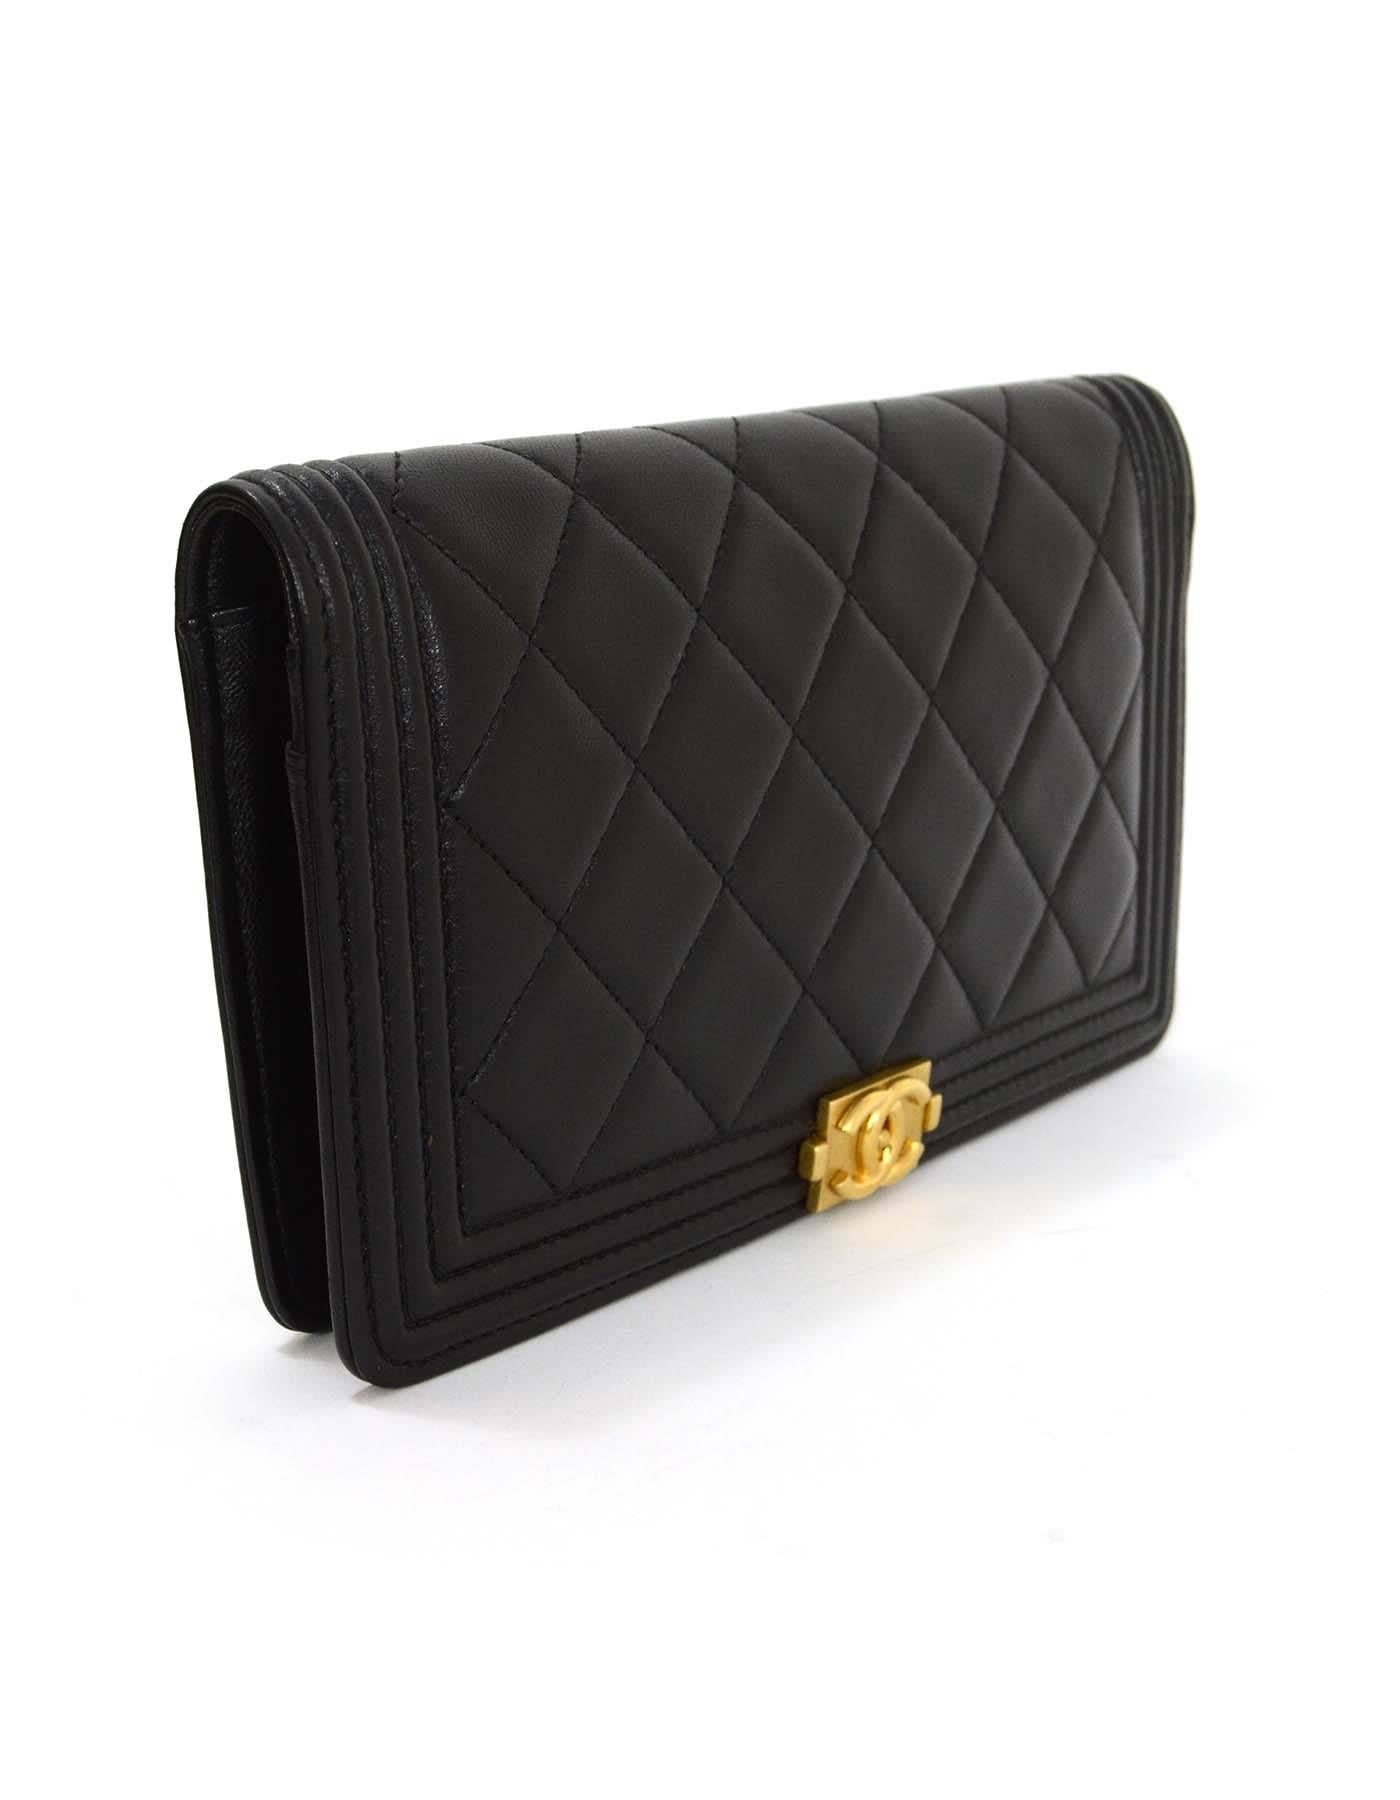 Chanel Black Lambskin Quilted Boy Yen Wallet GHW 
Features lambskin leather with a gold hardware CC logo

    Made in: Italy
    Year of Production: 2015
    Color: Black
    Hardware: Goldtone
    Materials: Lambskin
    Lining: Black